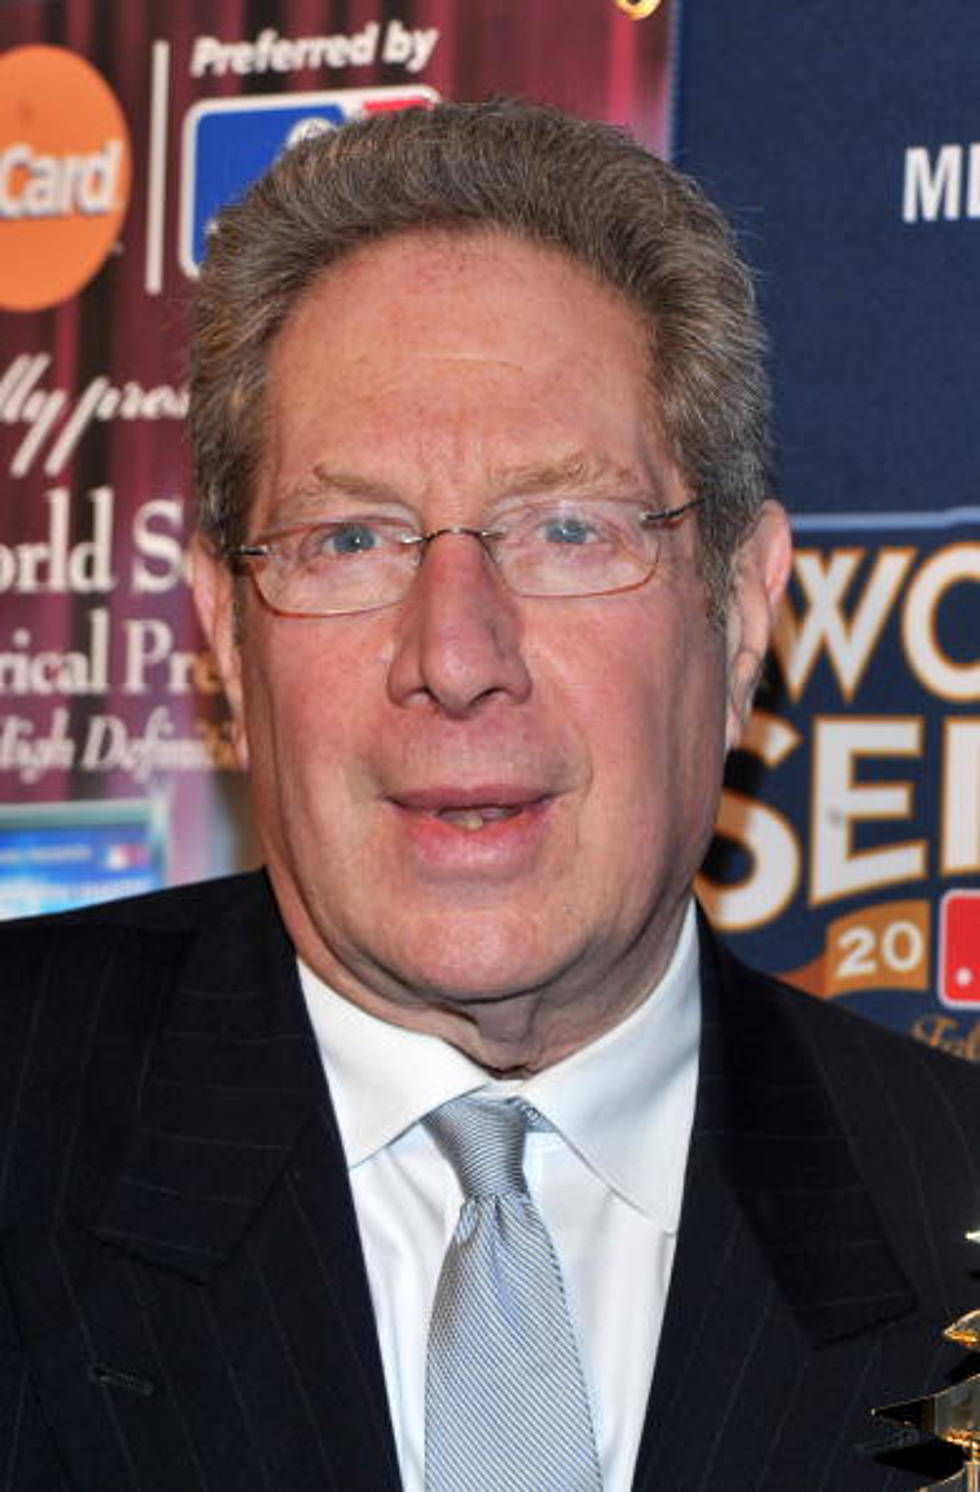 HBO's Real Sports Profiles John Sterling 